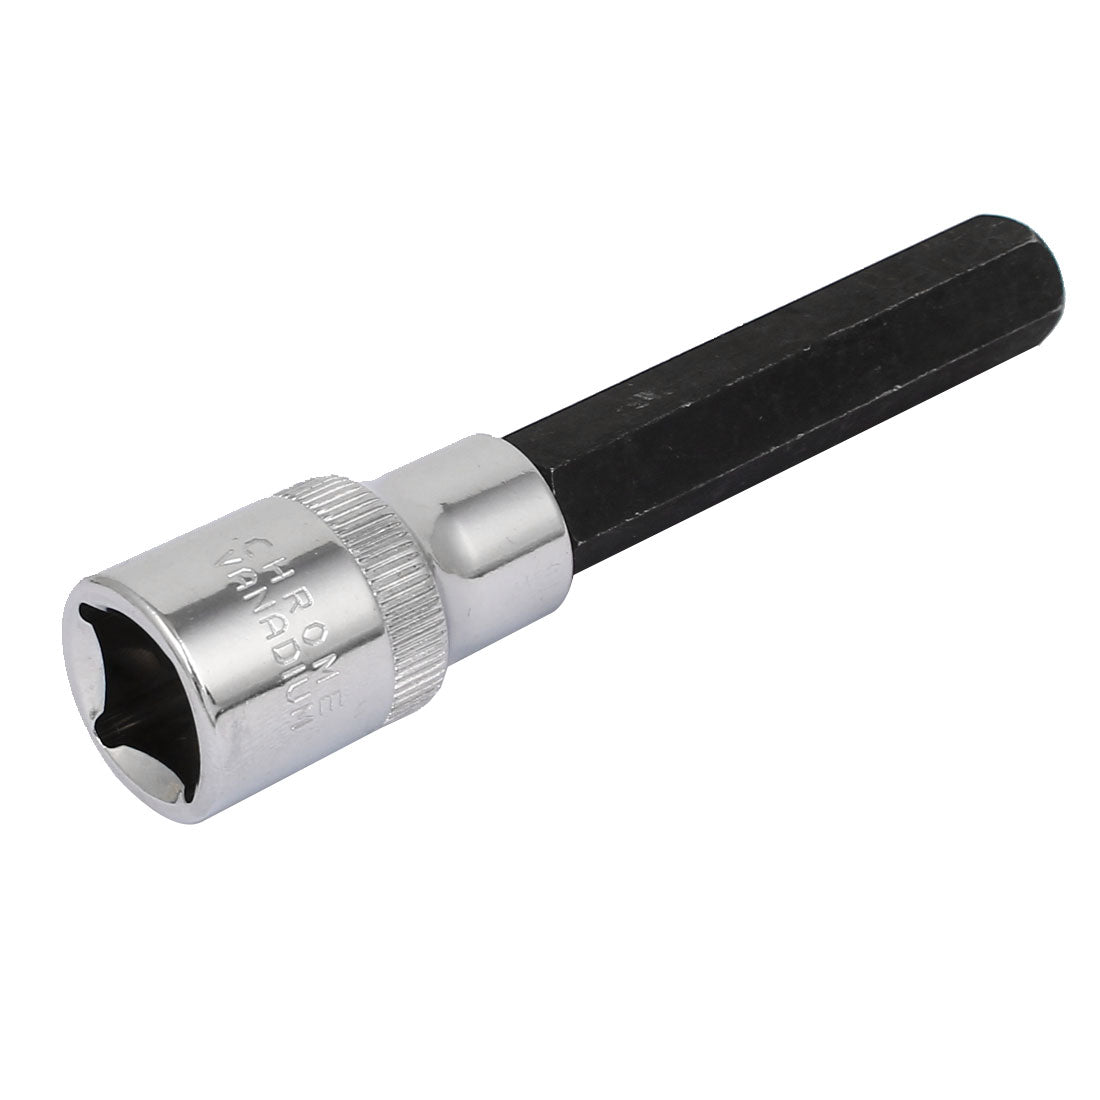 Uxcell Uxcell H12 12mm Hex Head S2 Steel Screwdriver Drive Socket 100mm Long